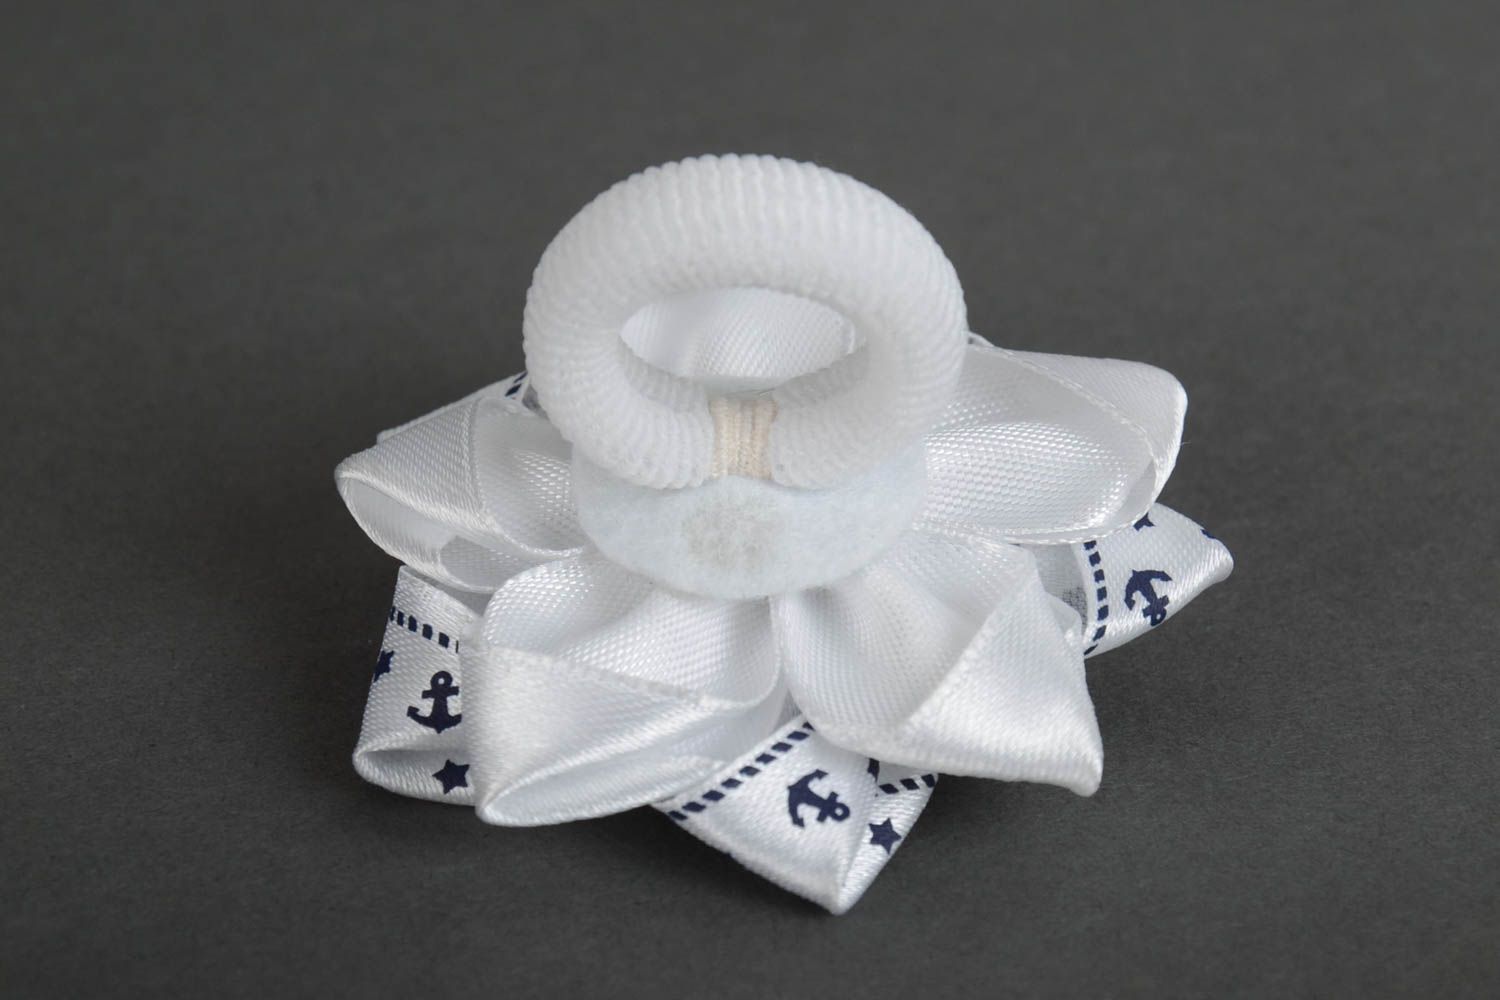 Handmade hair tie with kanzashi flower folded of white and patterned ribbons photo 3